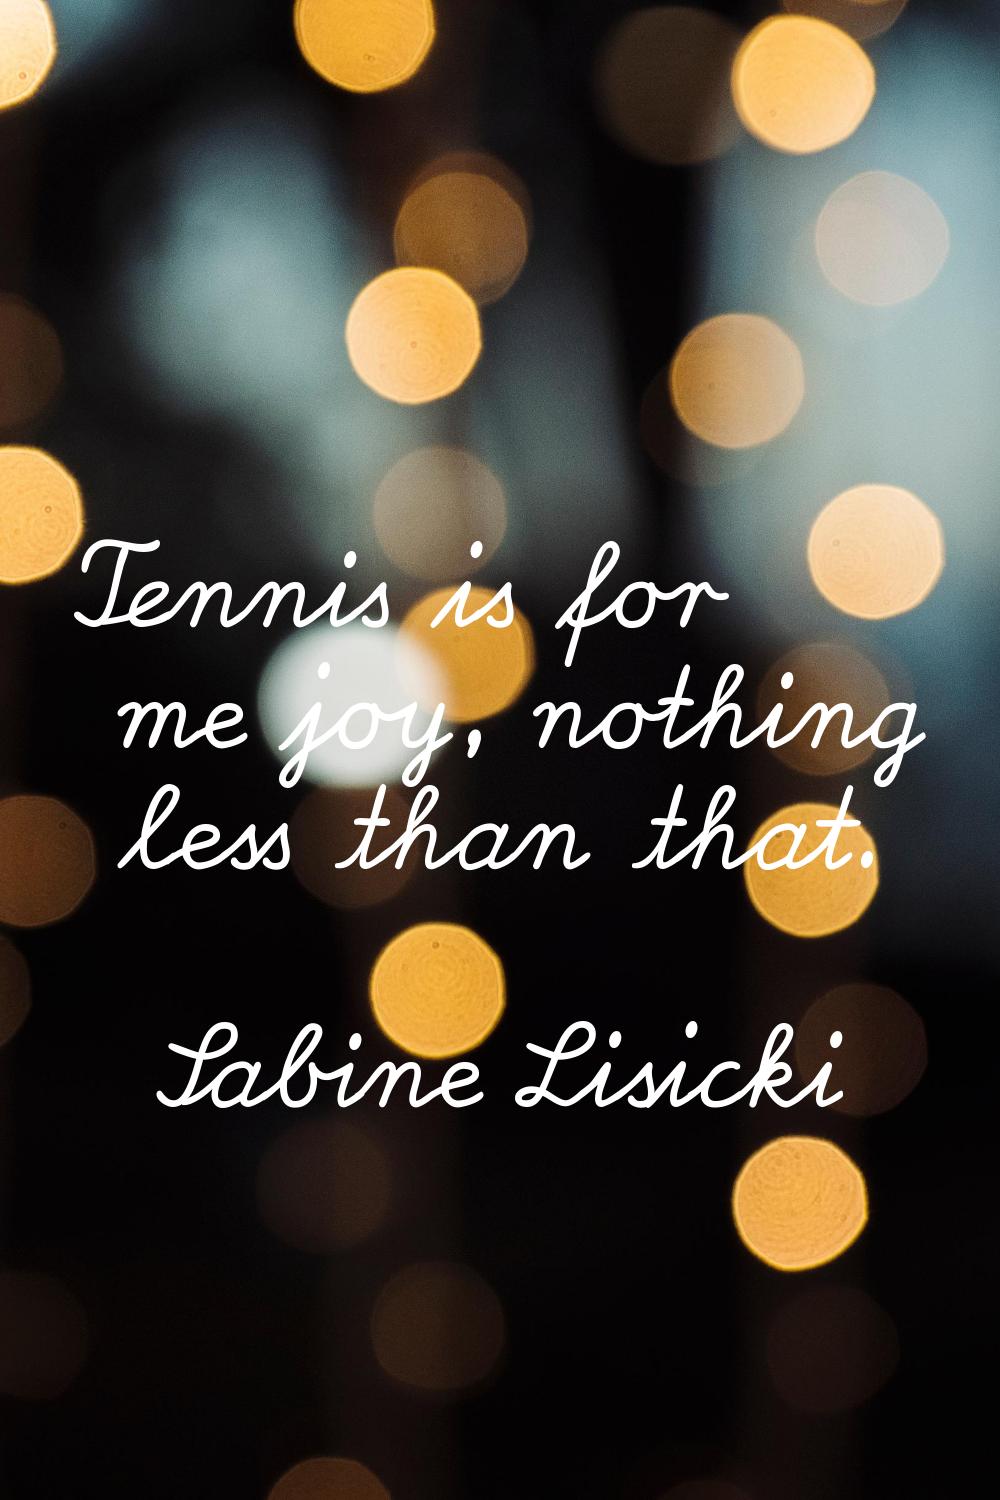 Tennis is for me joy, nothing less than that.